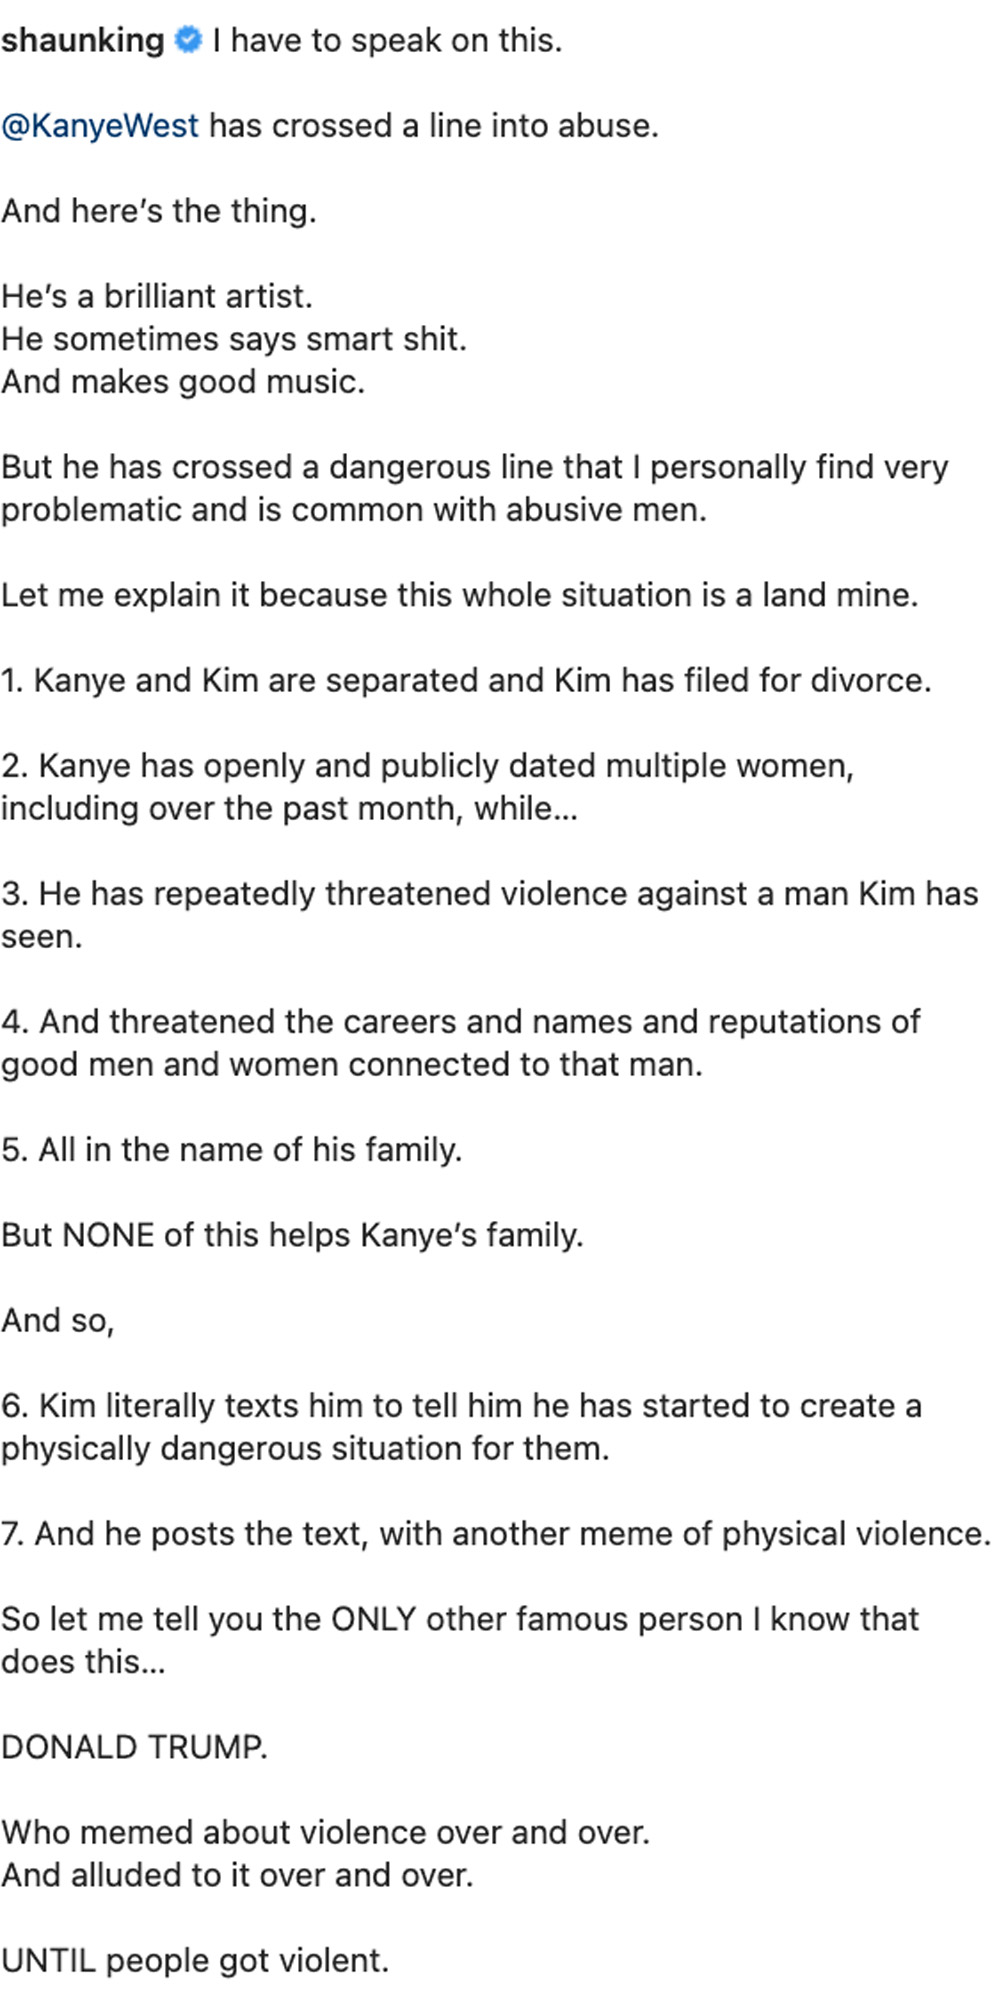 Kanye West has crossed a line into abuse. ⁣He’s a brilliant artist. He sometimes says smart shit. ⁣And makes good music. ⁣But he has crossed a dangerous line that I personally find very problematic and is common with abusive men. ⁣Let me explain it because this whole situation is a land mine. Kanye and Kim are separated and Kim has filed for divorce.⁣ Kanye has openly and publicly dated multiple women, including over the past month, while…⁣He has repeatedly threatened violence against a man Kim has seen. ⁣